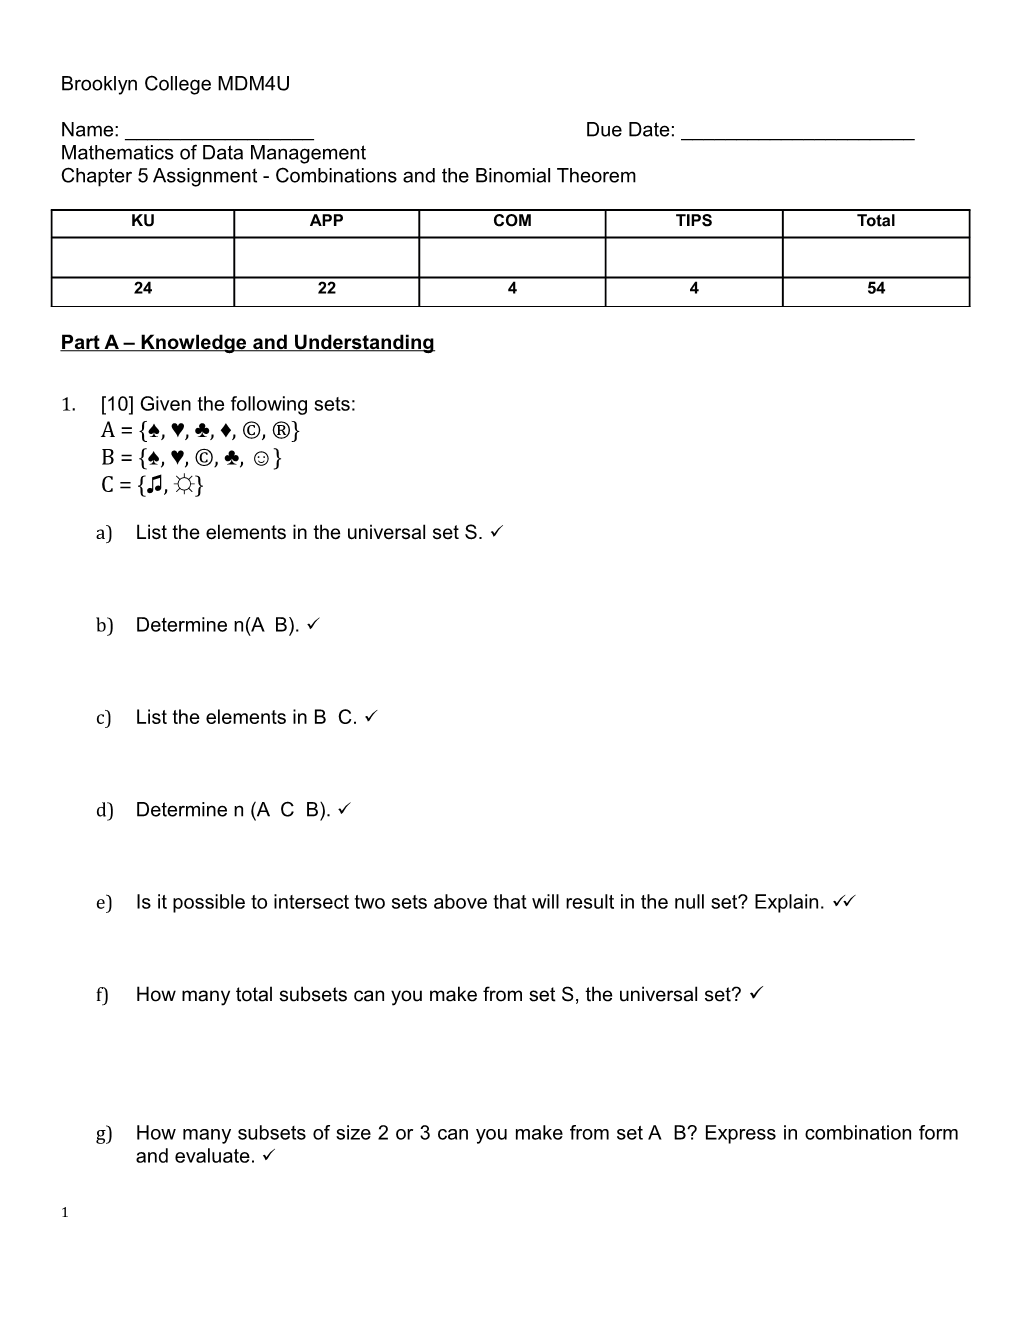 Chapter 5Assignment - Combinations and the Binomial Theorem